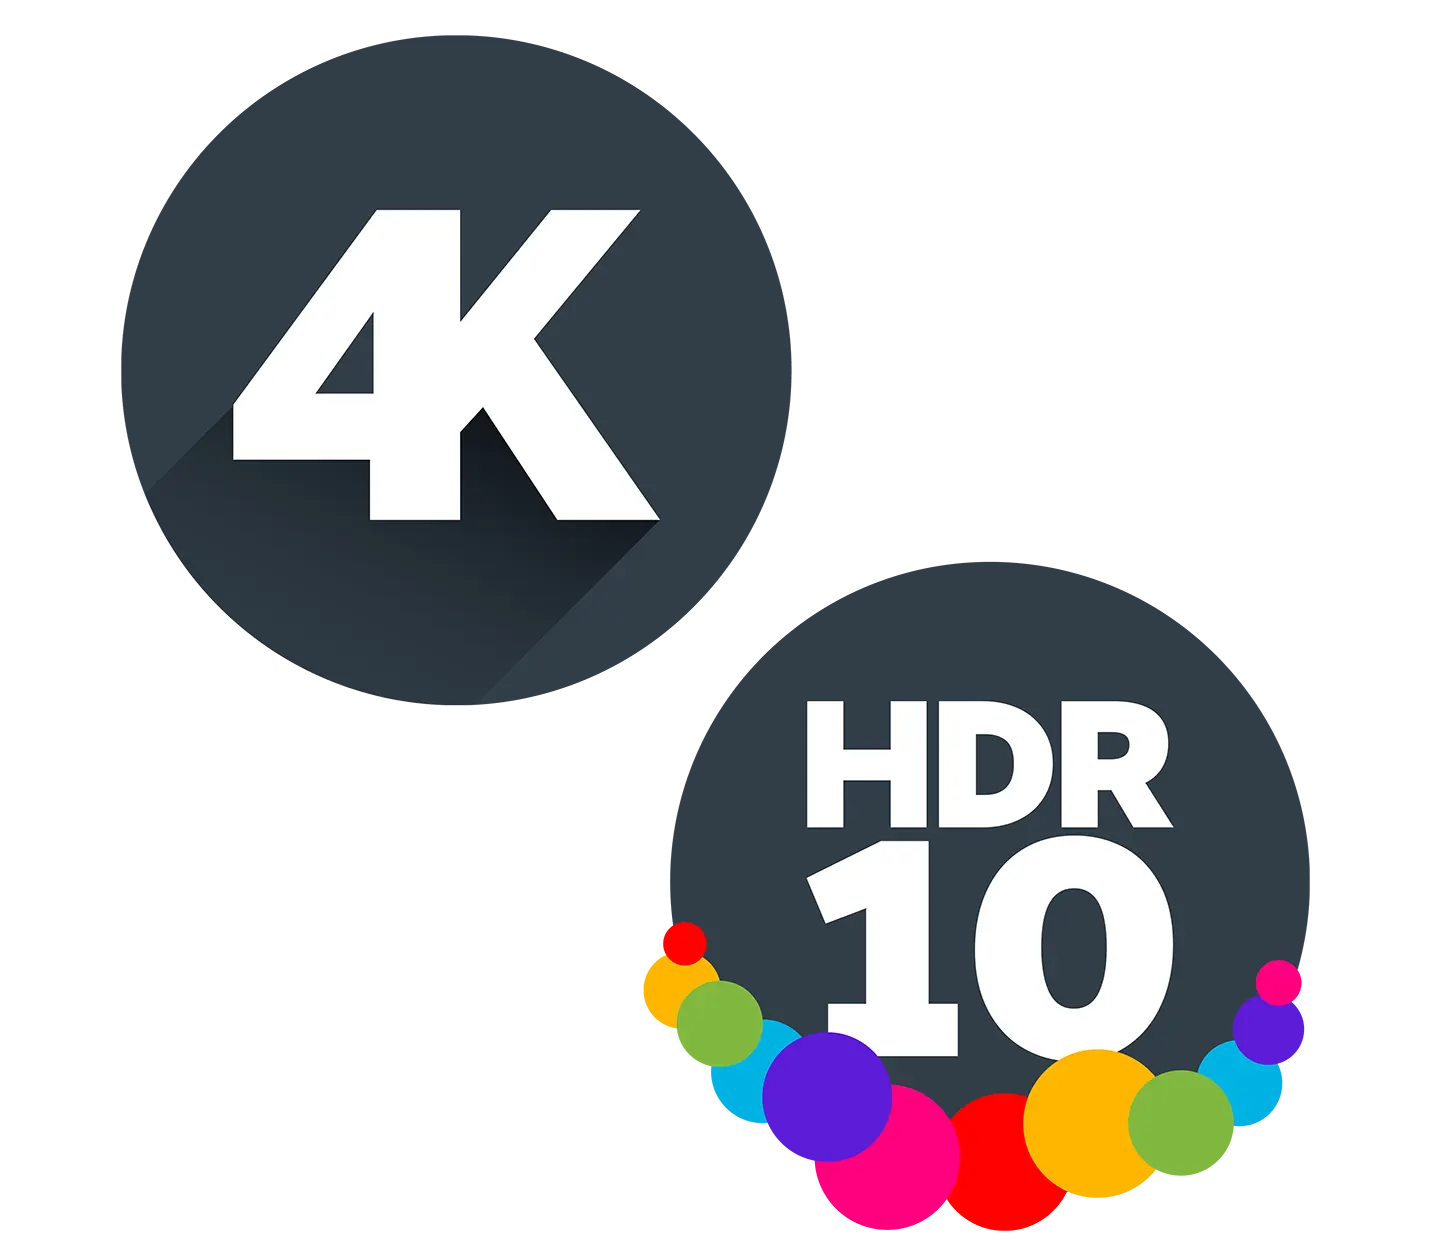 4k and HDR10 technologies